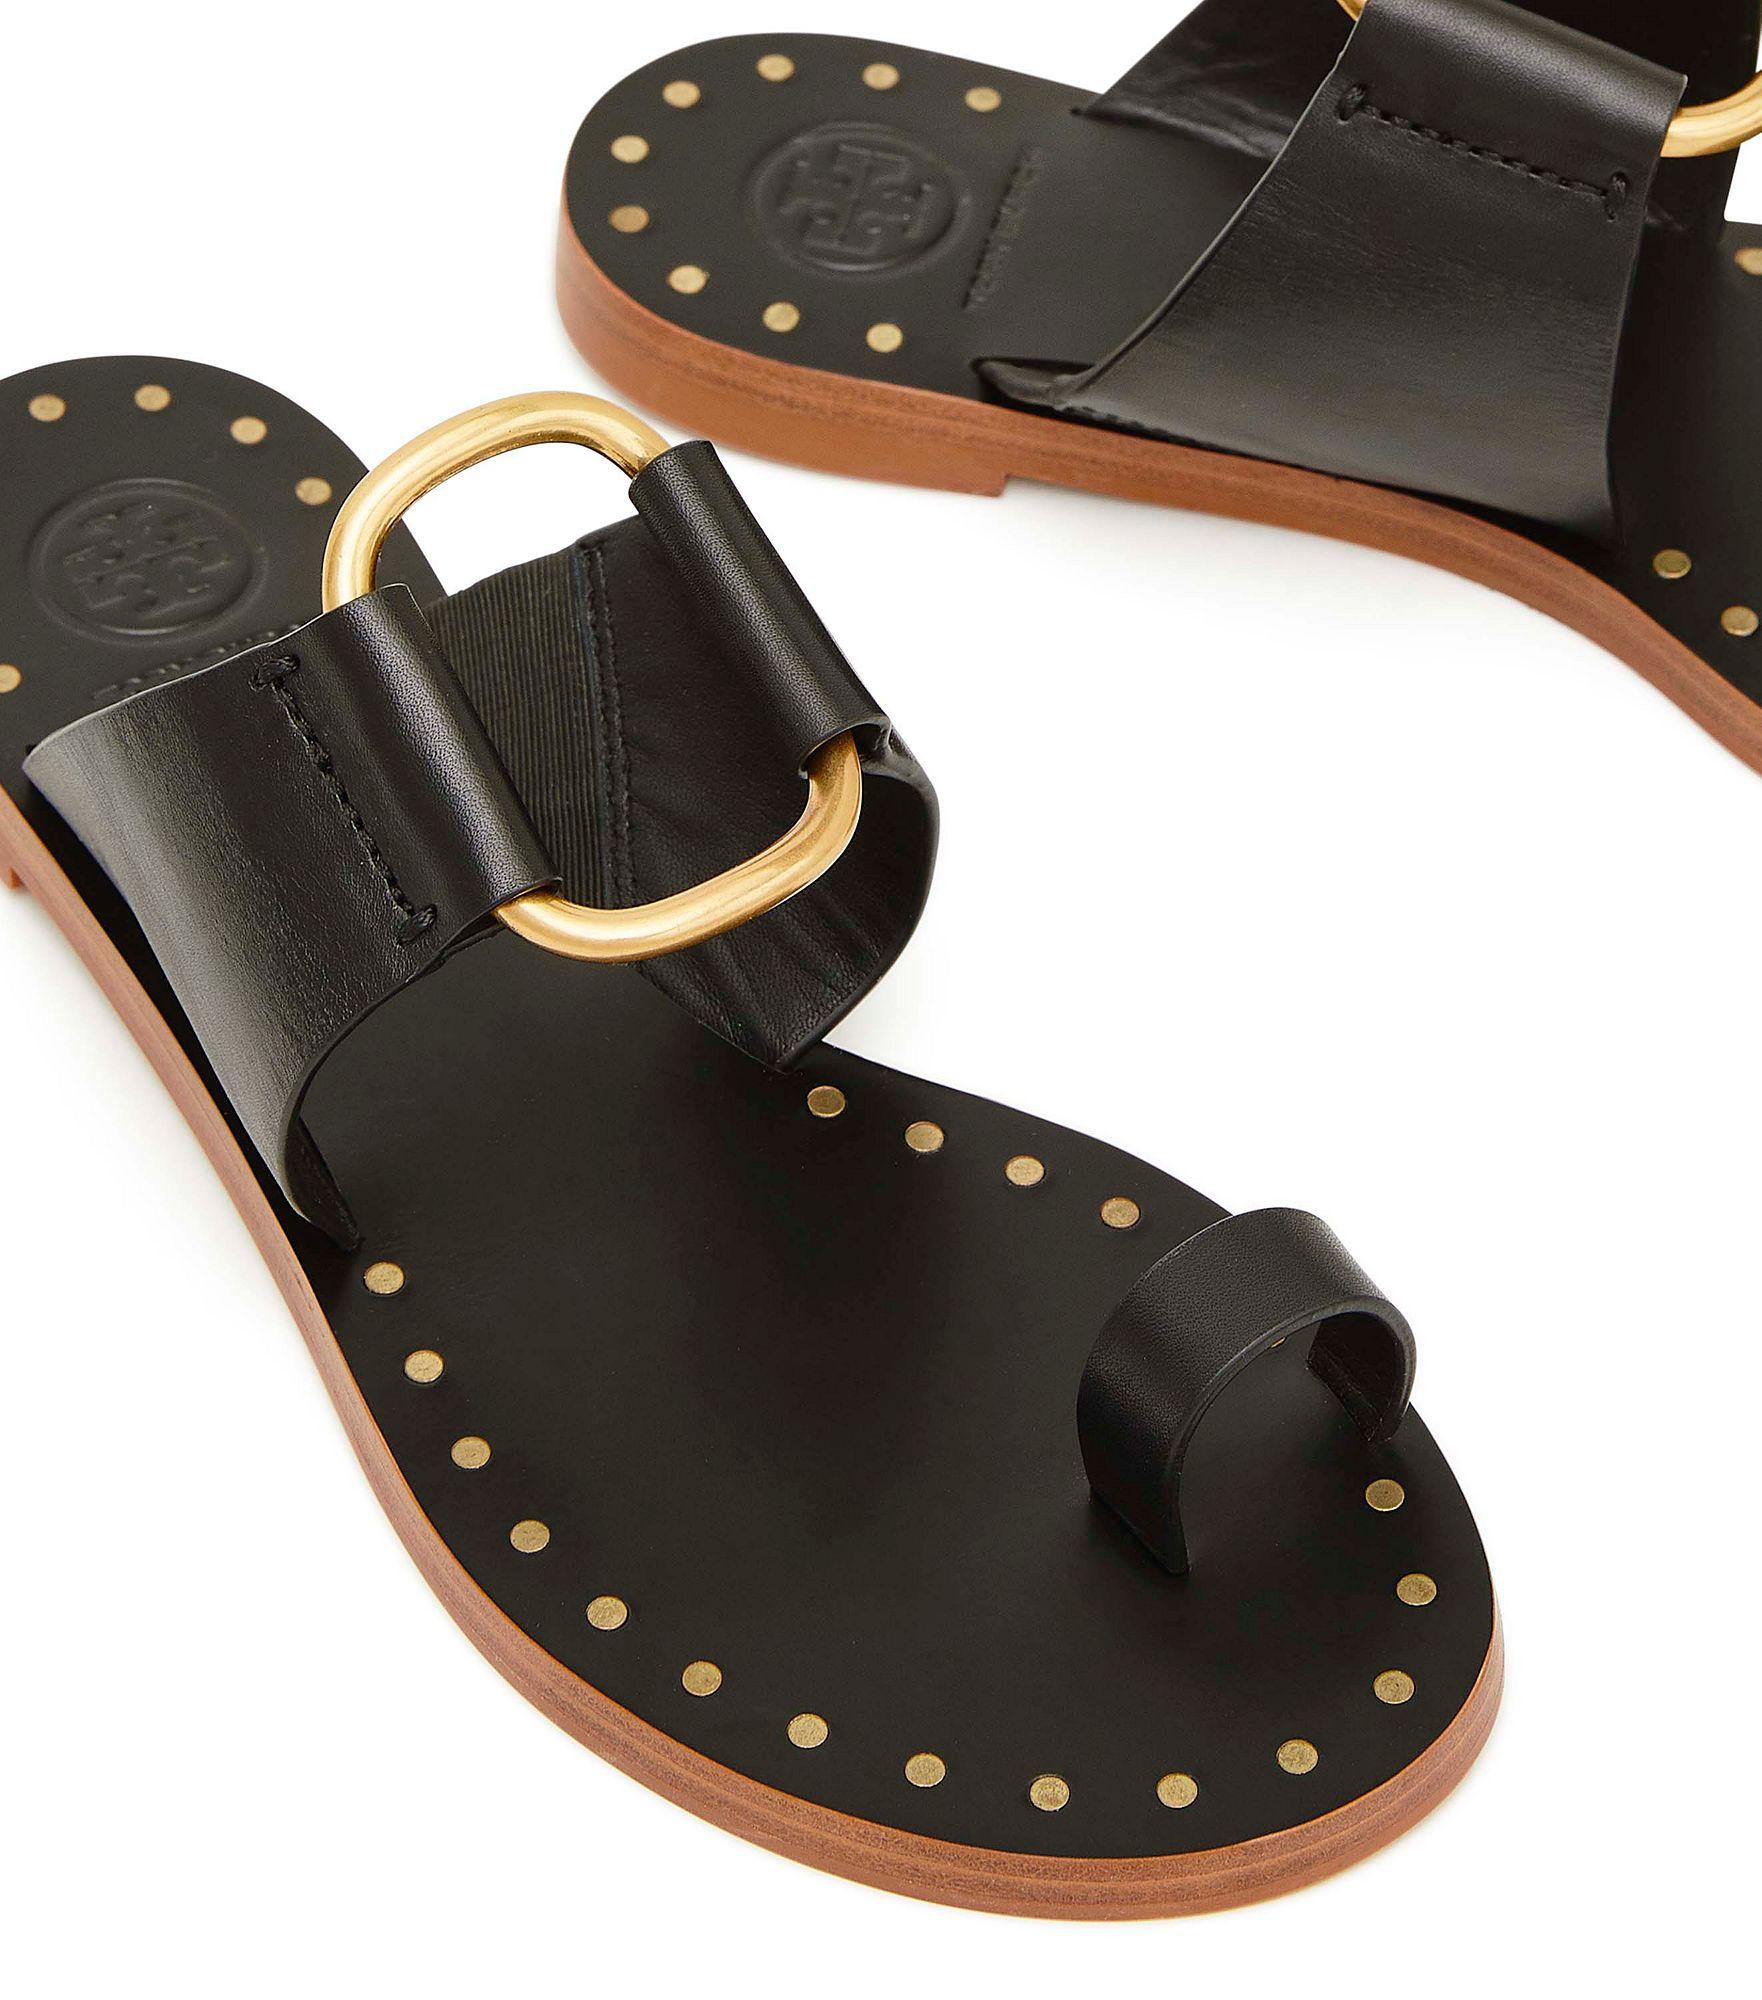 Tory Burch Ravello Studded Leather Ring Sandals in Black - Lyst